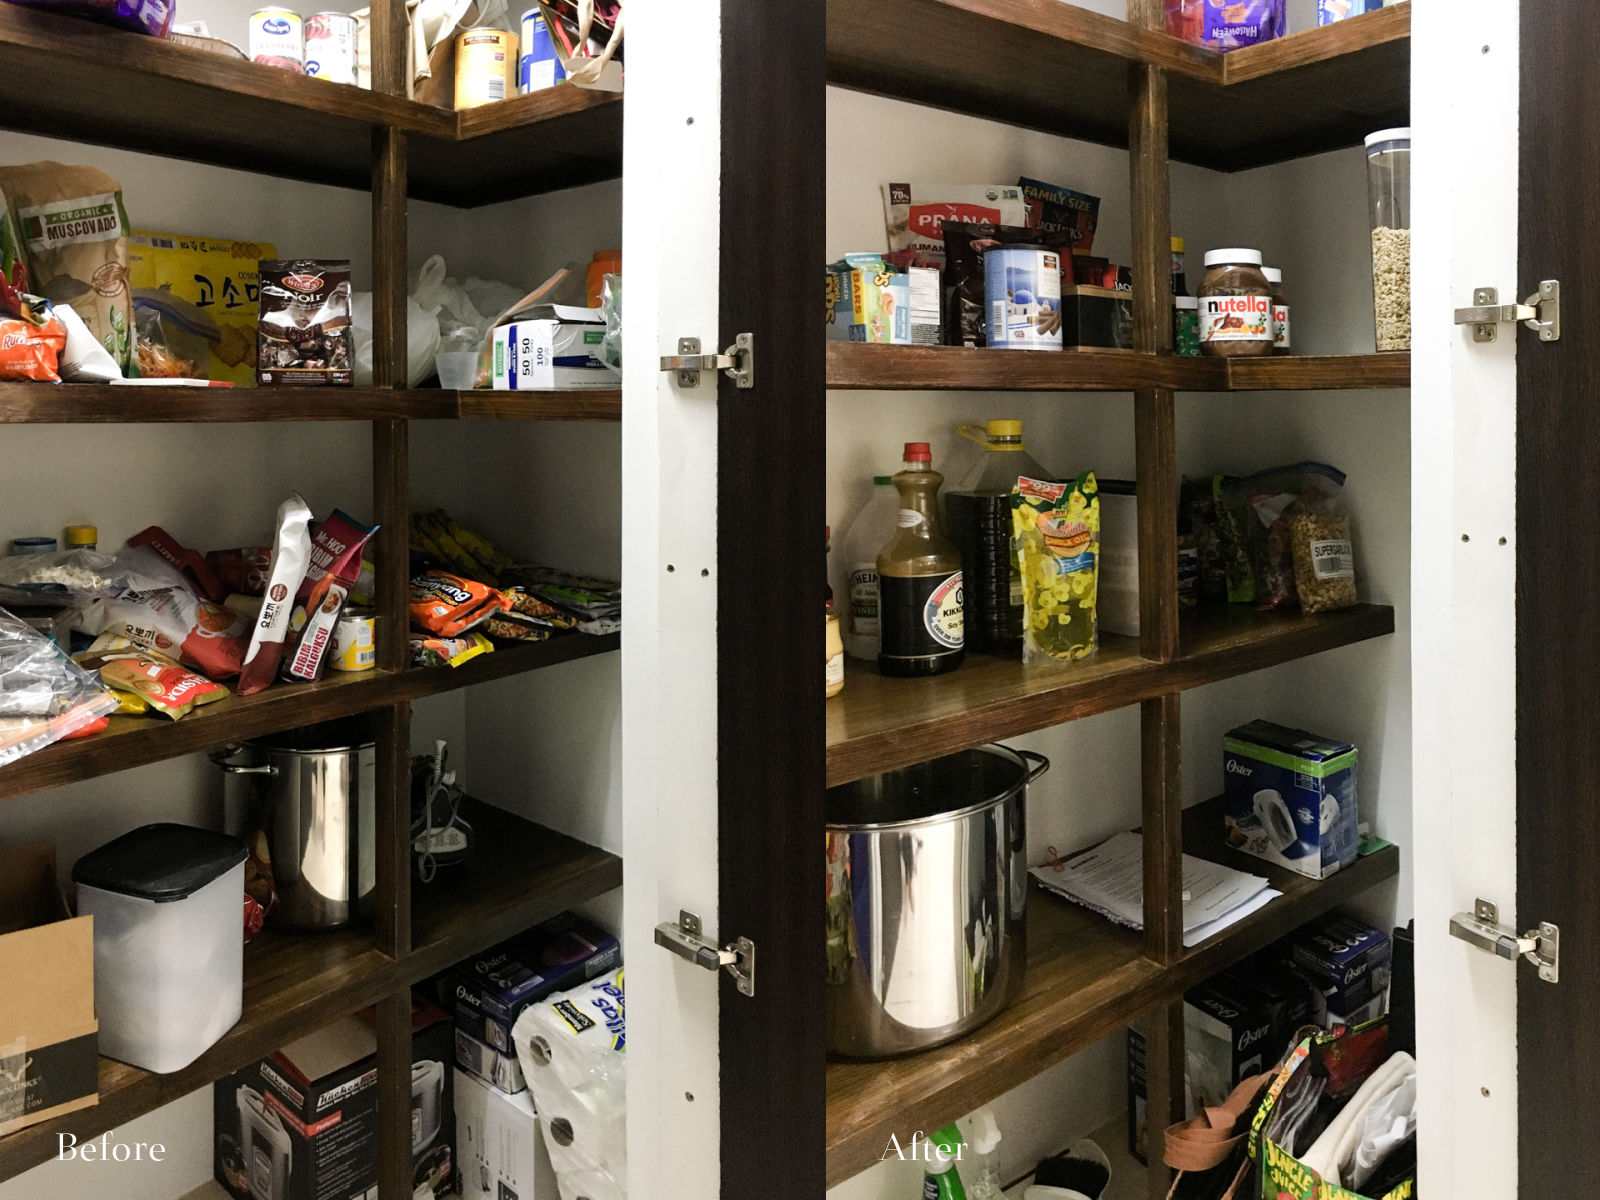 https://www.chuzailiving.com/wp-content/uploads/2021/02/Simple-Pantry-Organization-Before-After-6.jpg